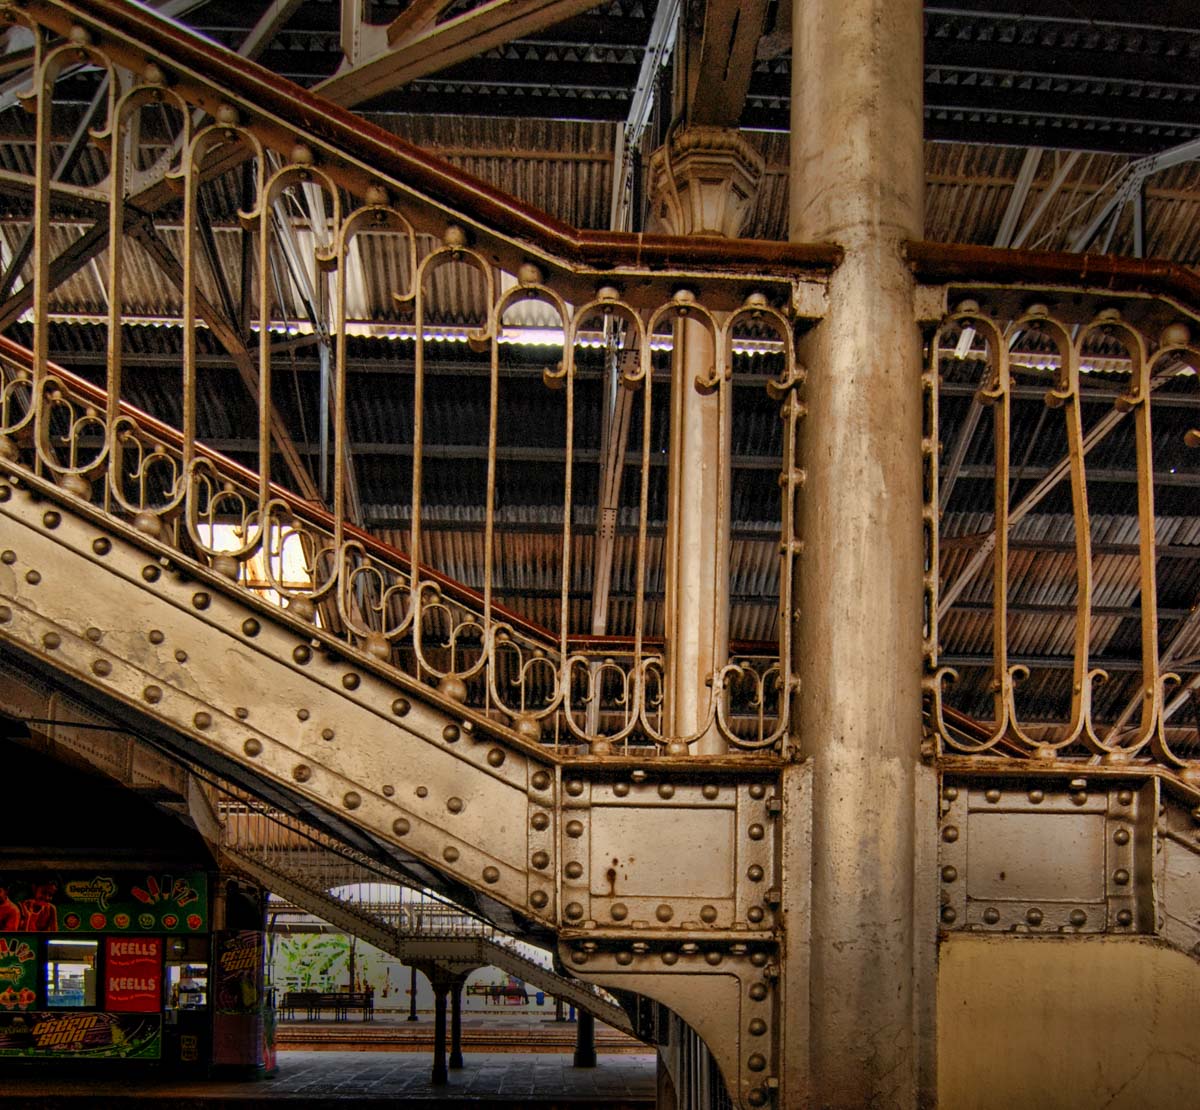 Stairs in a train station in Colombo - the capital of Sri Lanka